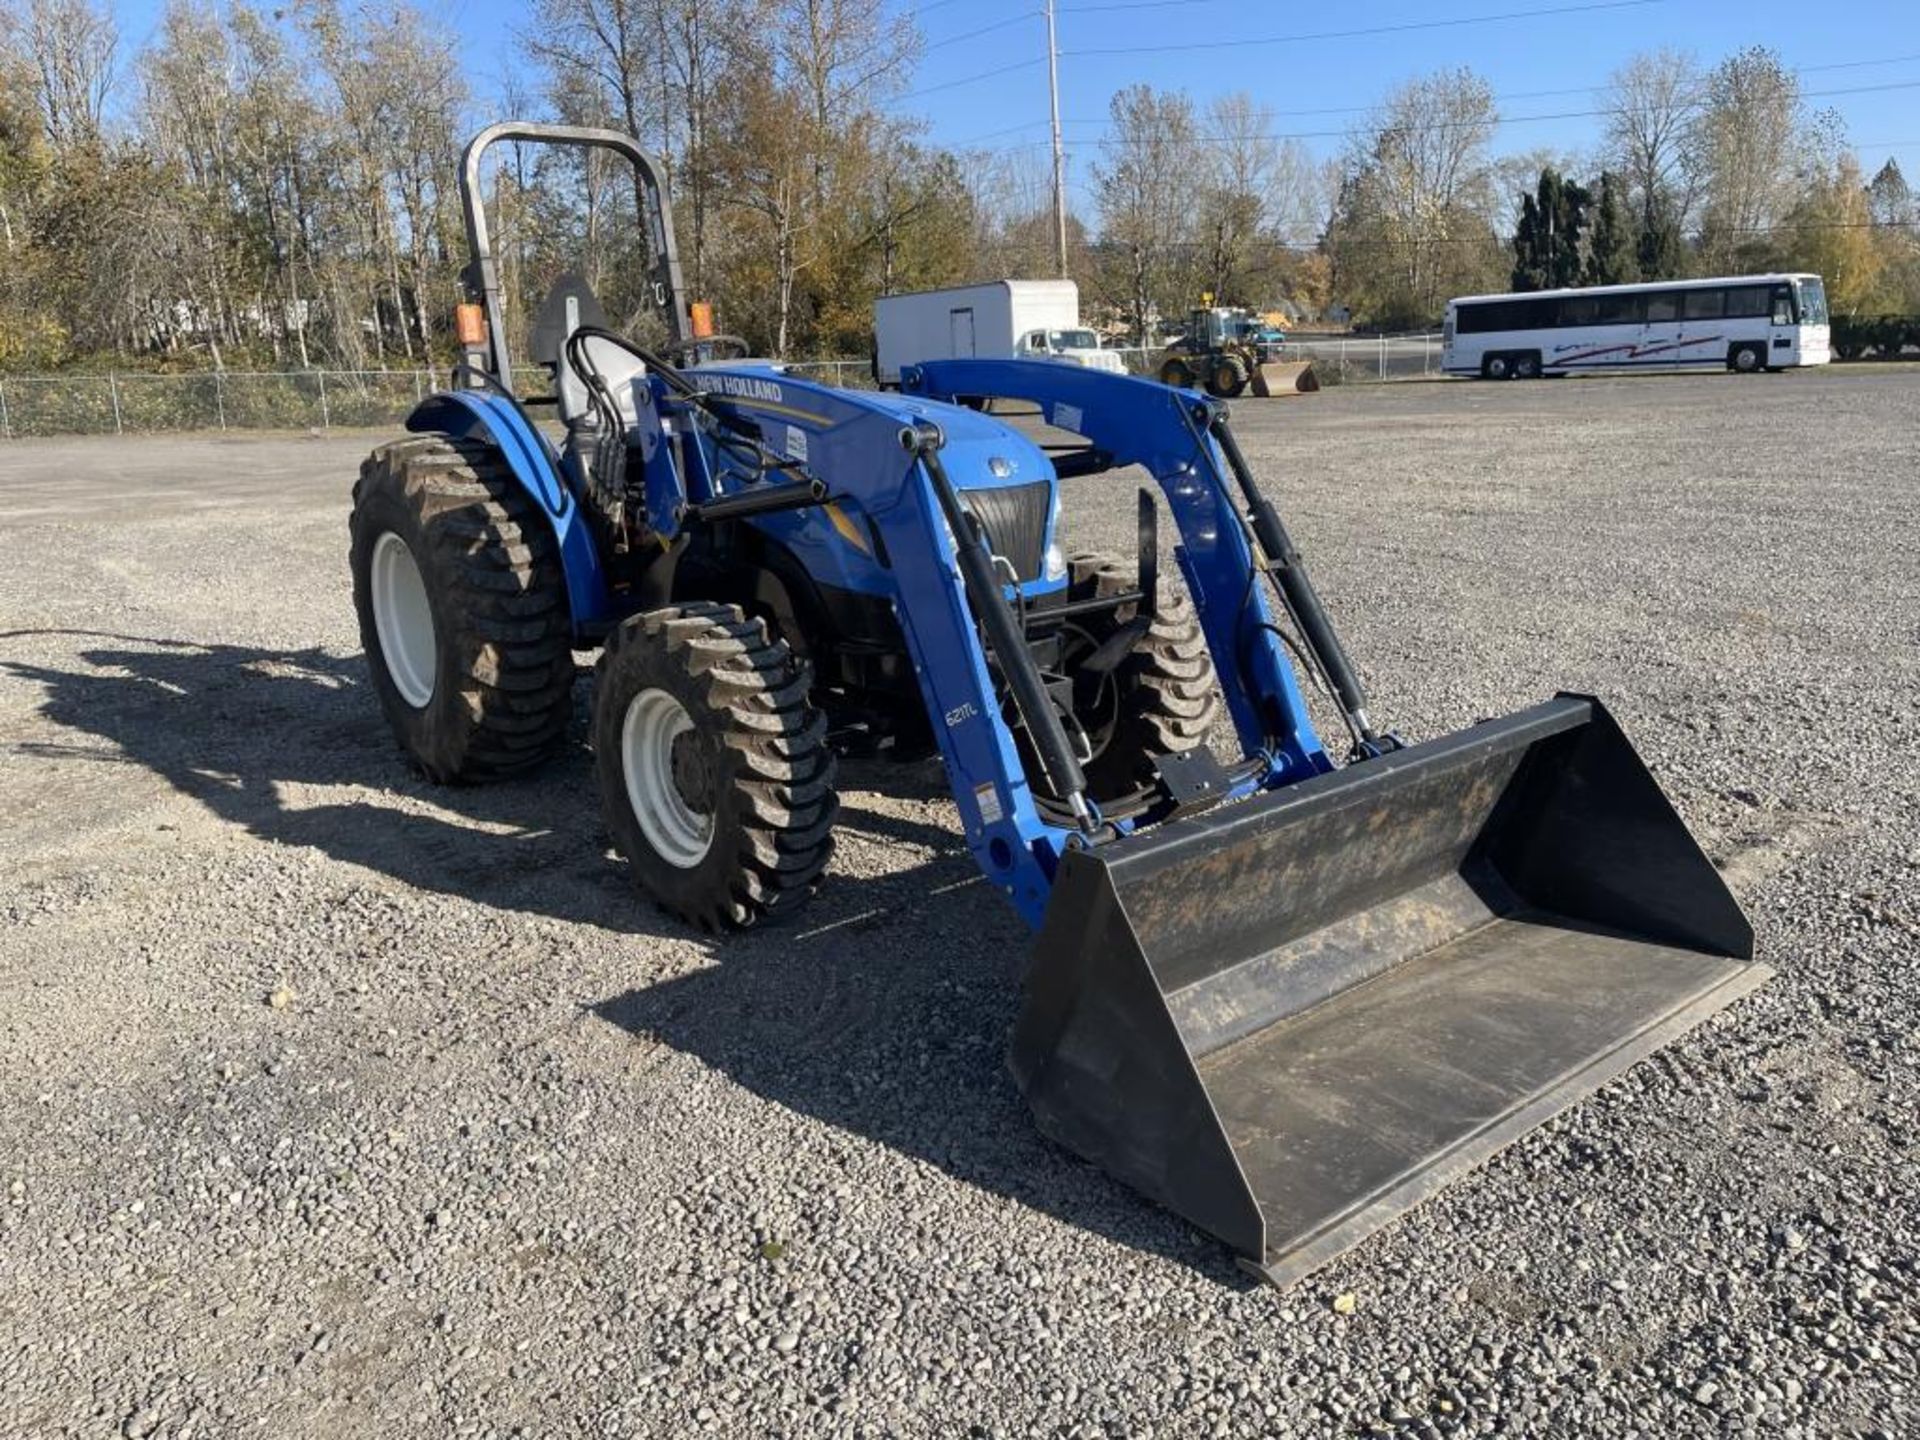 2017 Newholland Workmaster 60 Utility Tractor - Image 2 of 30